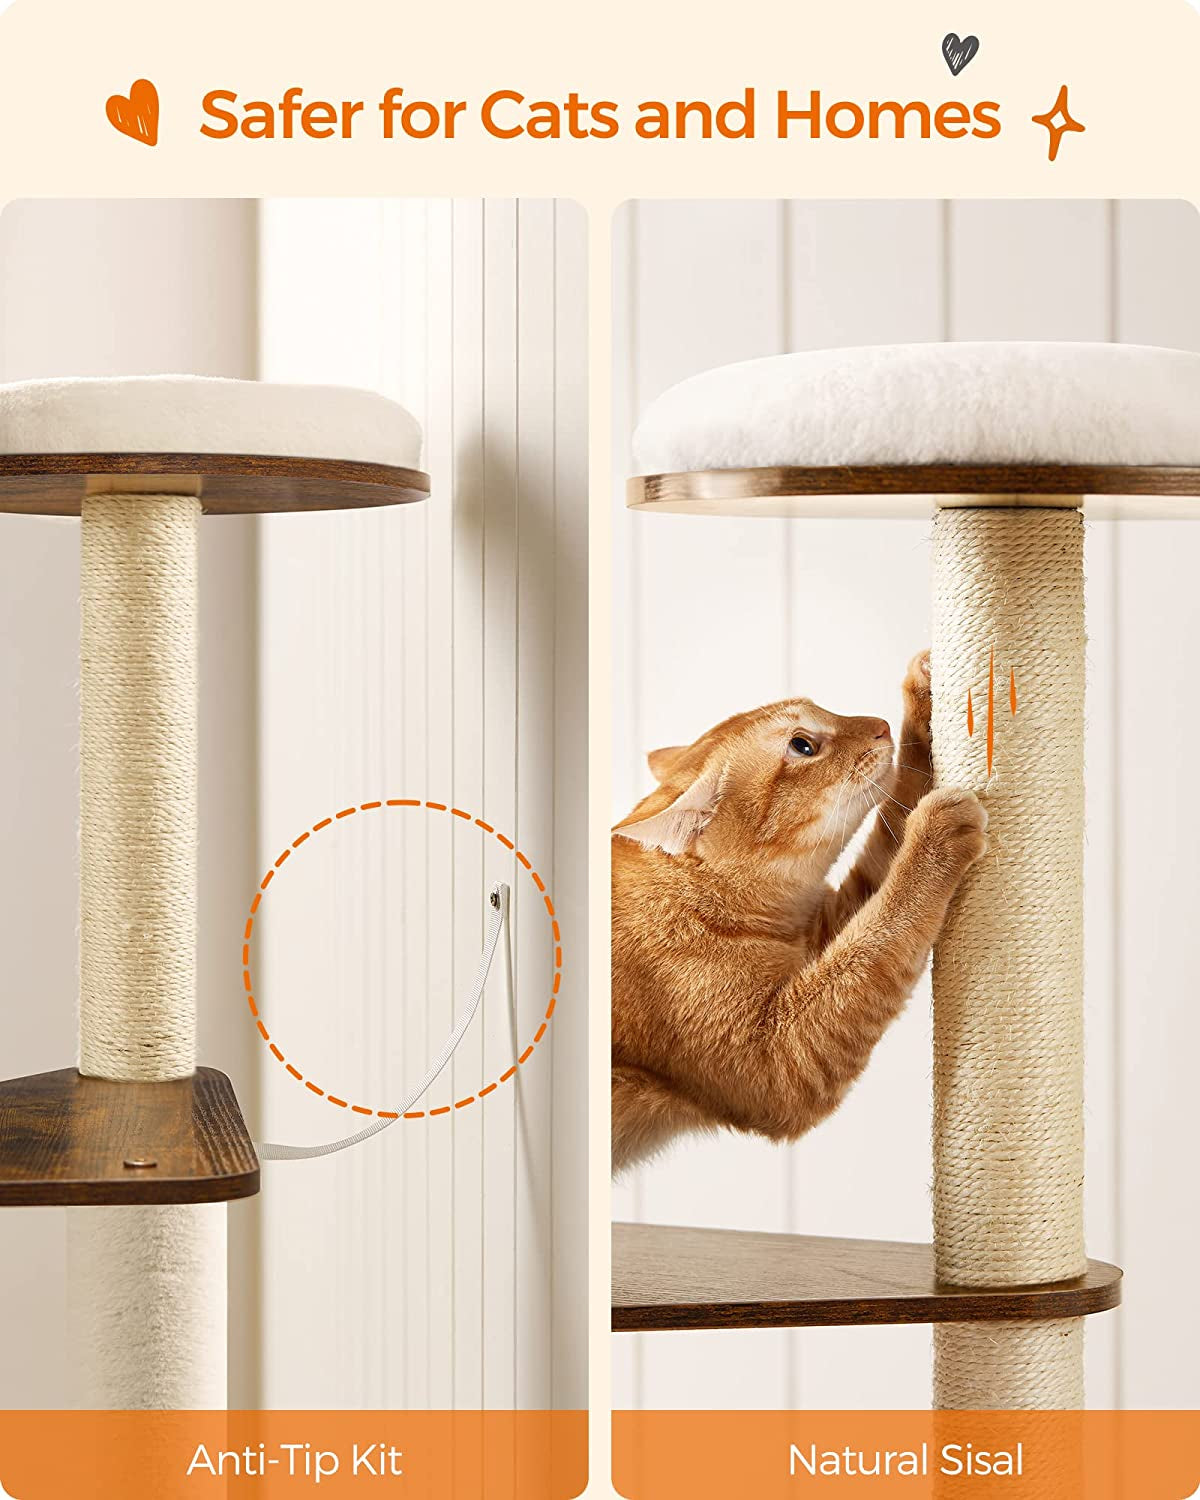 Cat Bliss Elevated: Woodywonders 65-Inch Modern Cat Tower - Stylish, Multi-Level Playground with Scratching Posts, Cozy Perch, and Washable Cushions for Indoor Cats - Rustic Brown Elegance UPCT166X01